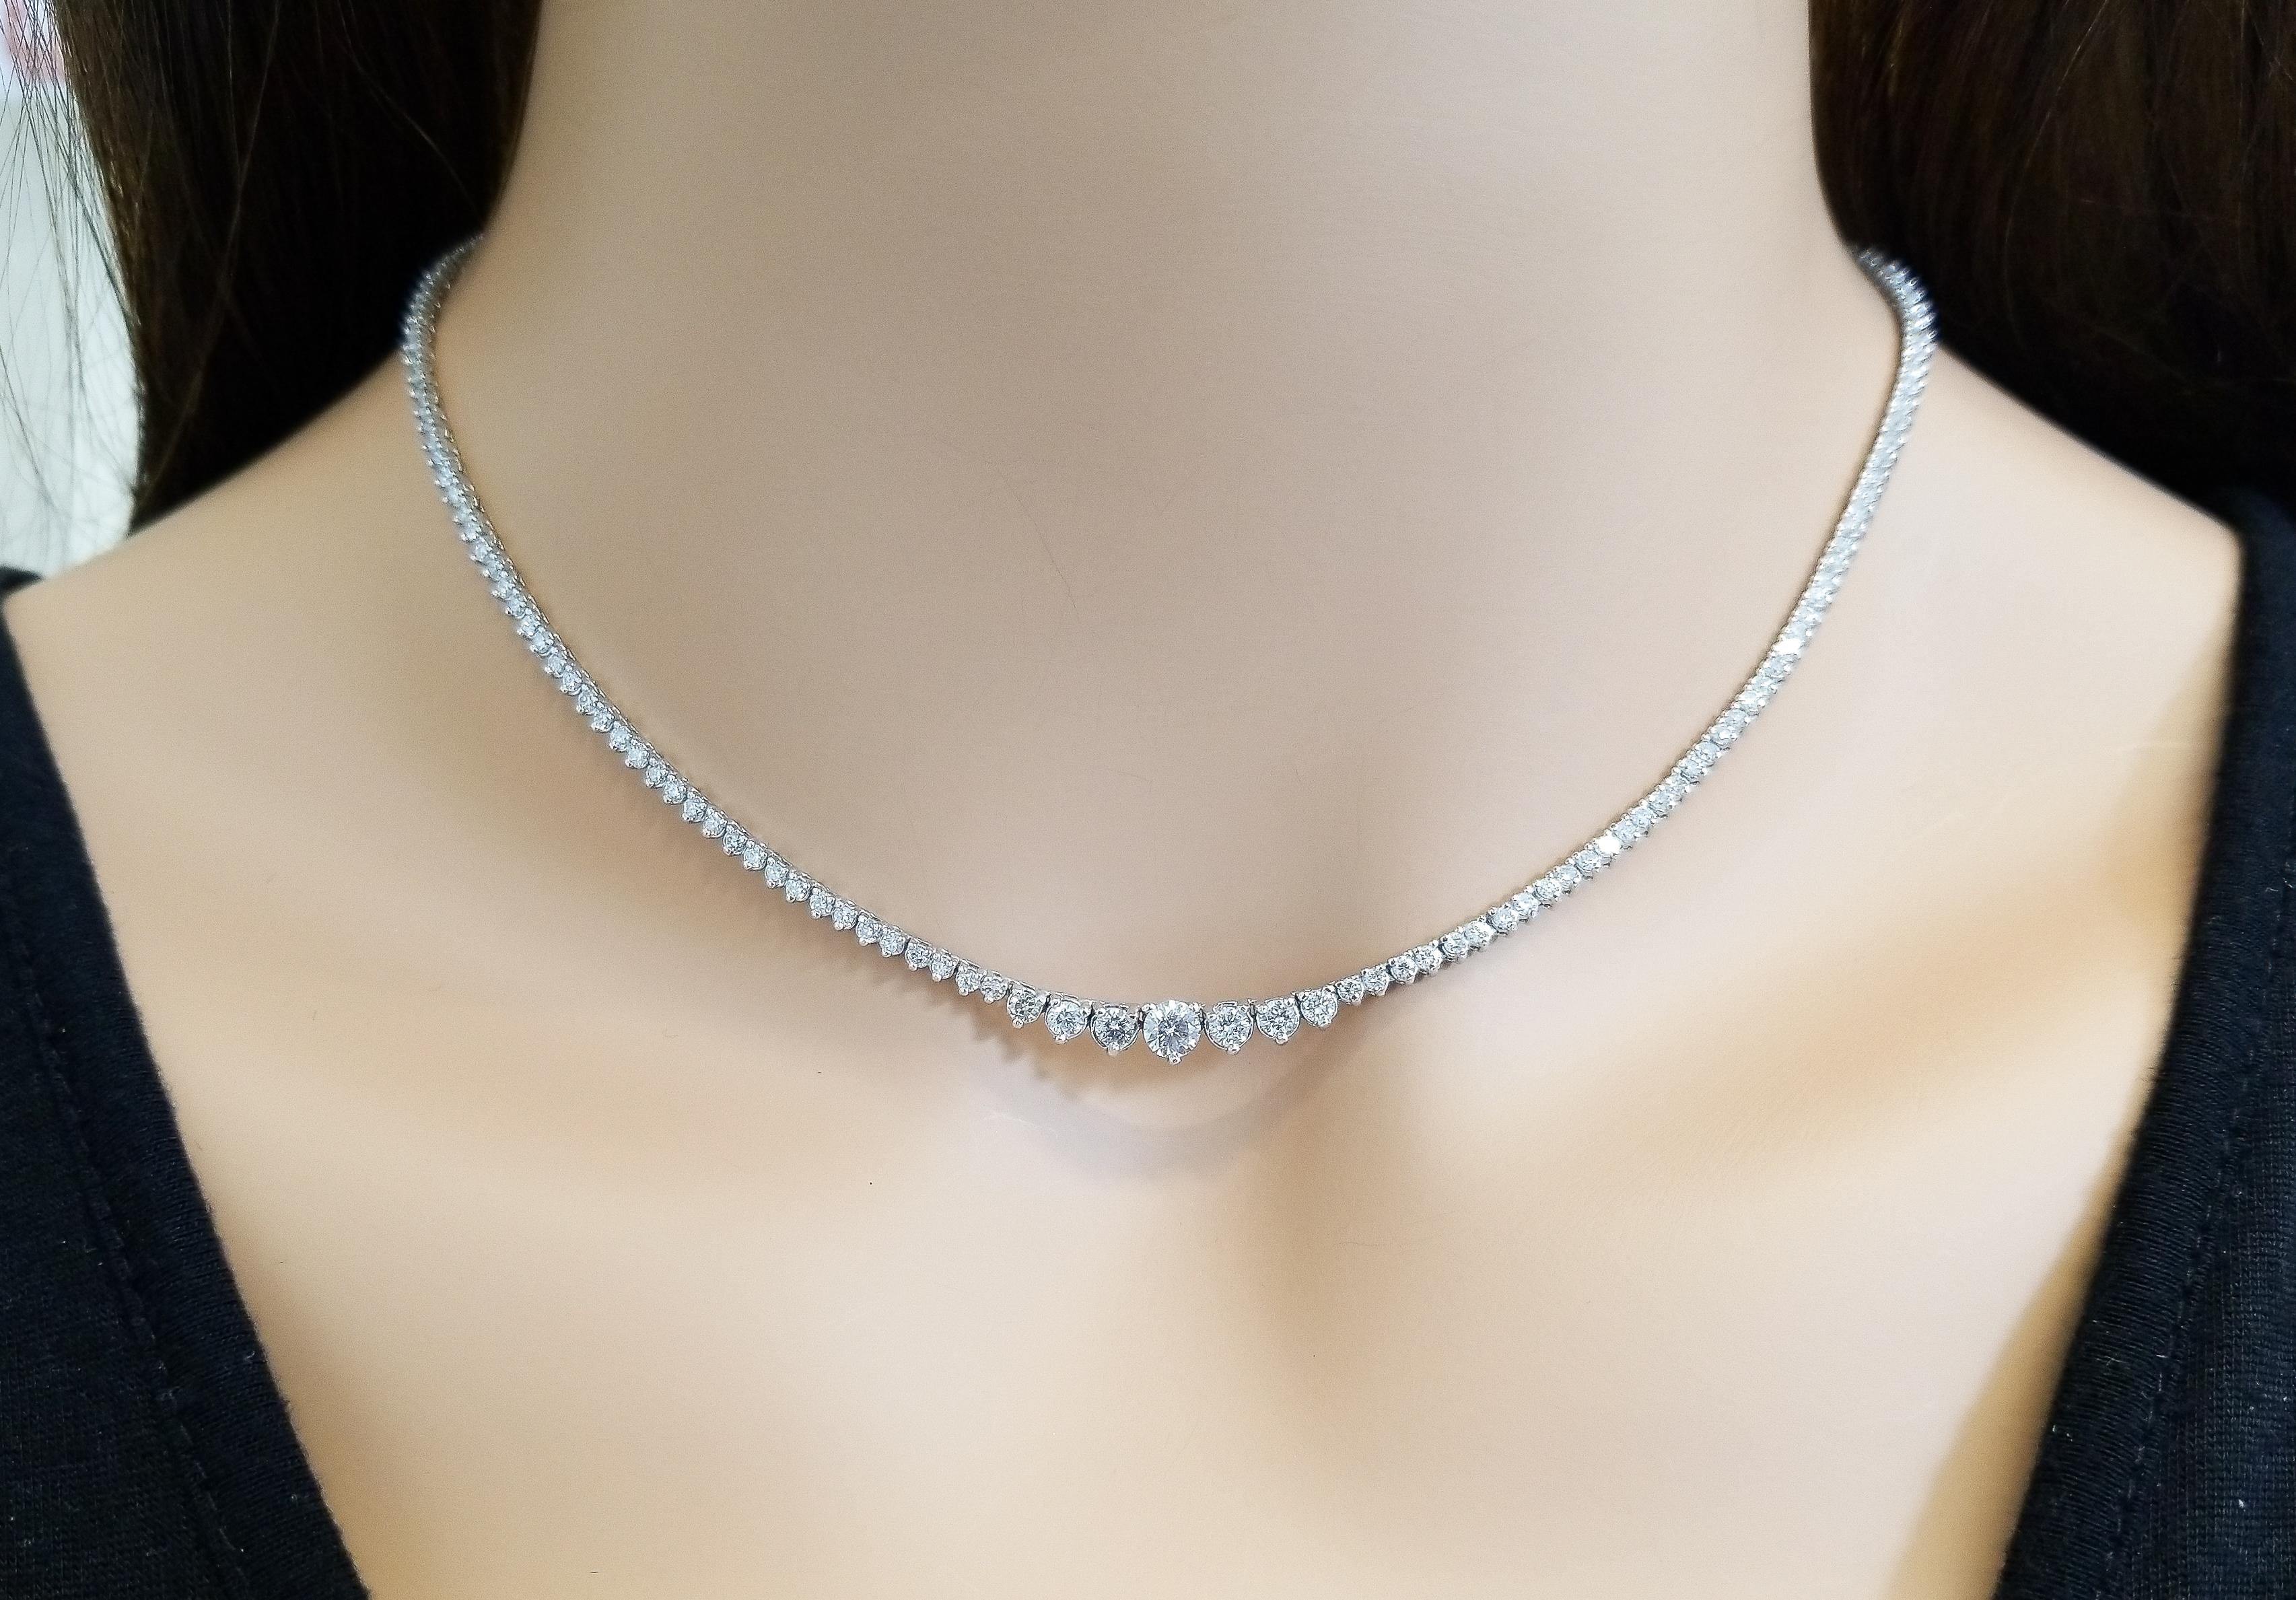 This is a graduated diamond riviera necklace. 191 round brilliant cut diamonds totaling 4.22 carats are precision set in the 3 prong classic setting. The diamonds complete around this outstanding piece in 14k white gold. With your hair up, you have